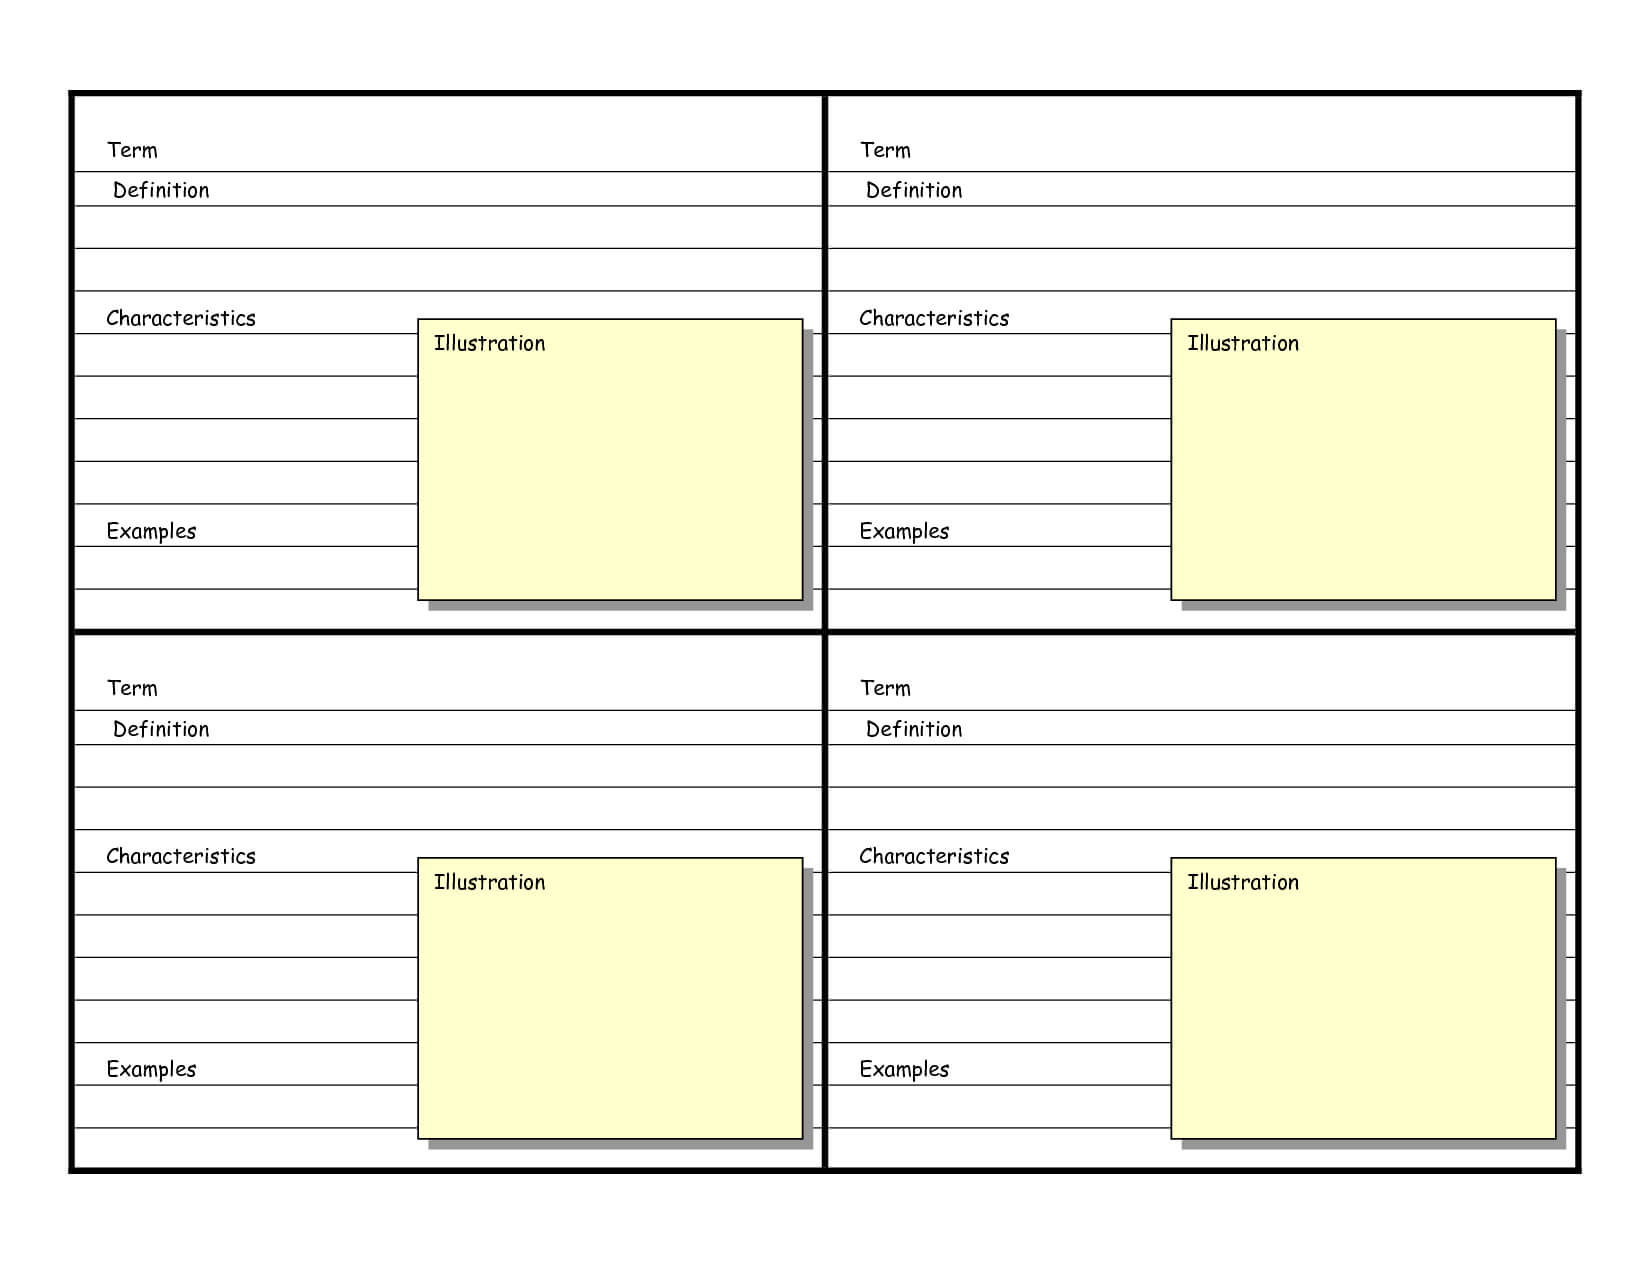 Blank Vocabulary Card Template | Vocabulary Cards Within Baseball Card Template Word